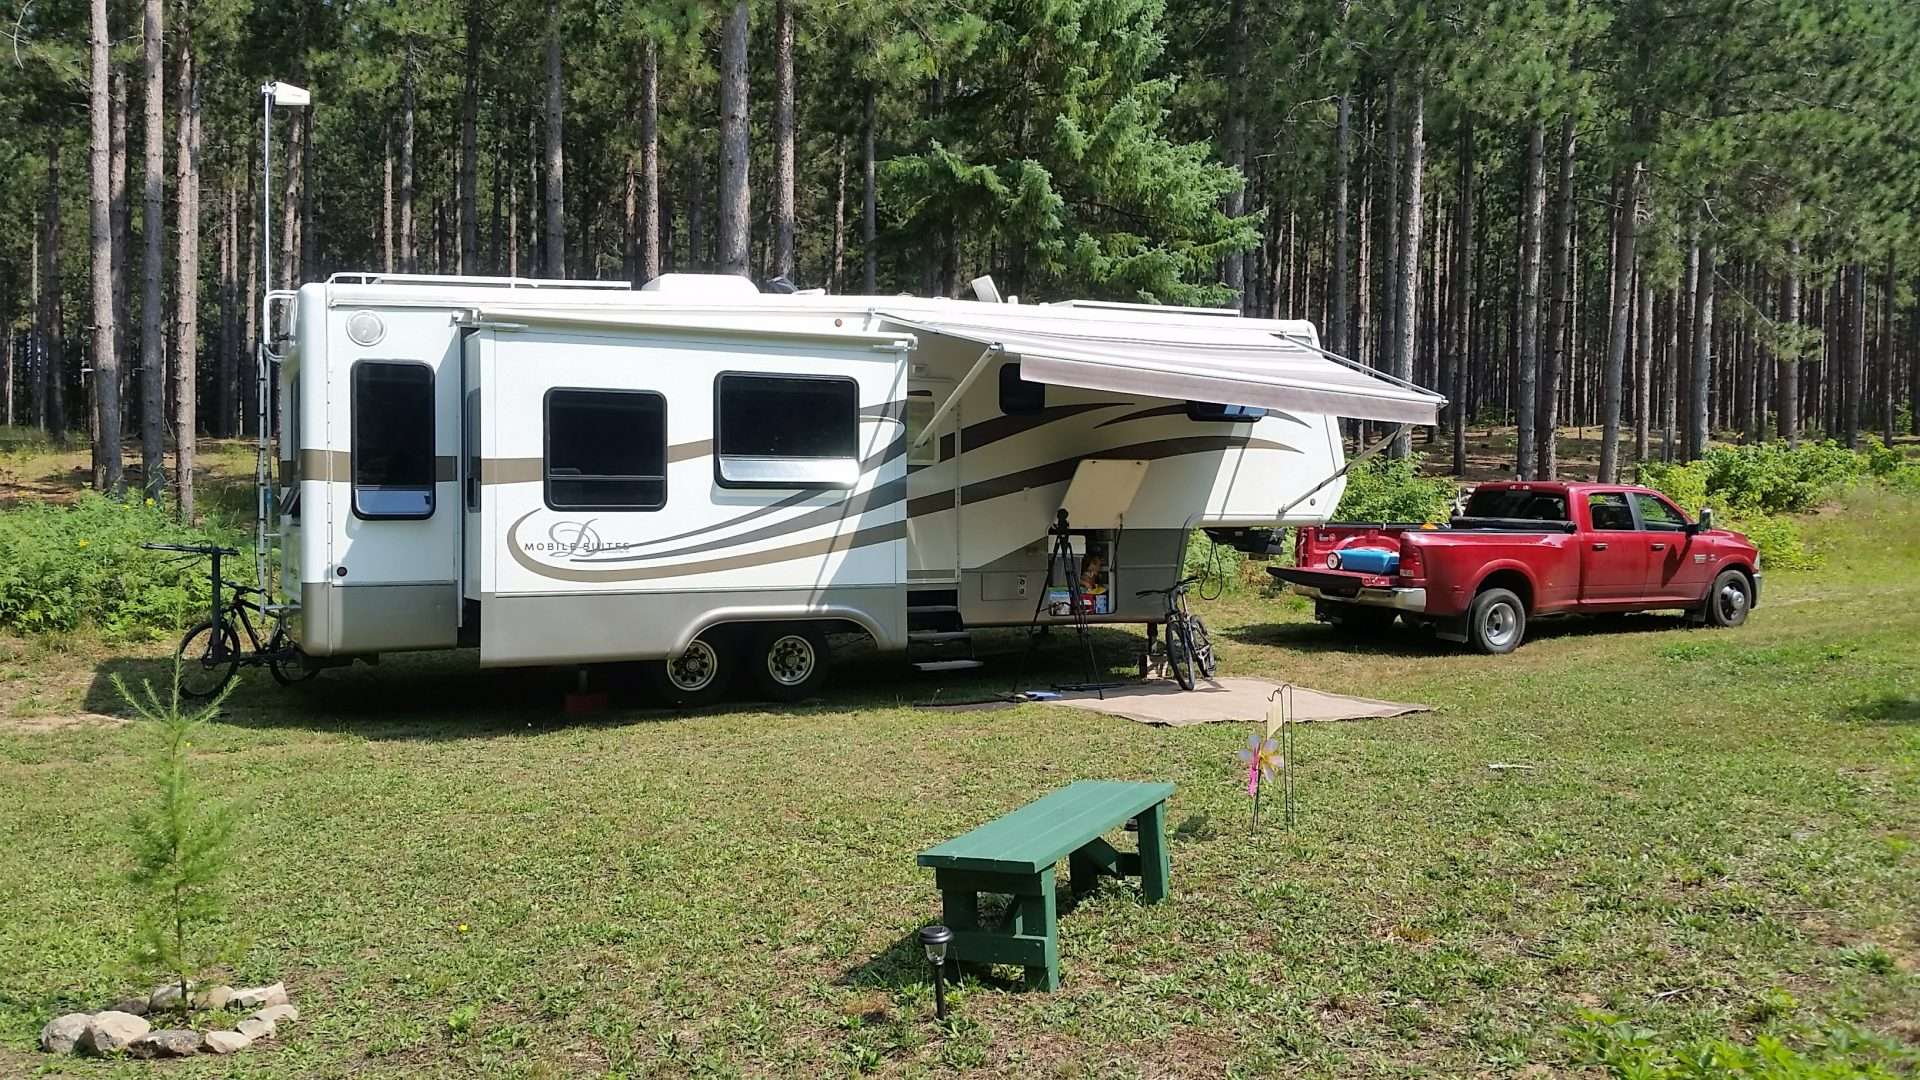 Mortons on the Move fifth wheel RV parked at campsite in forest.